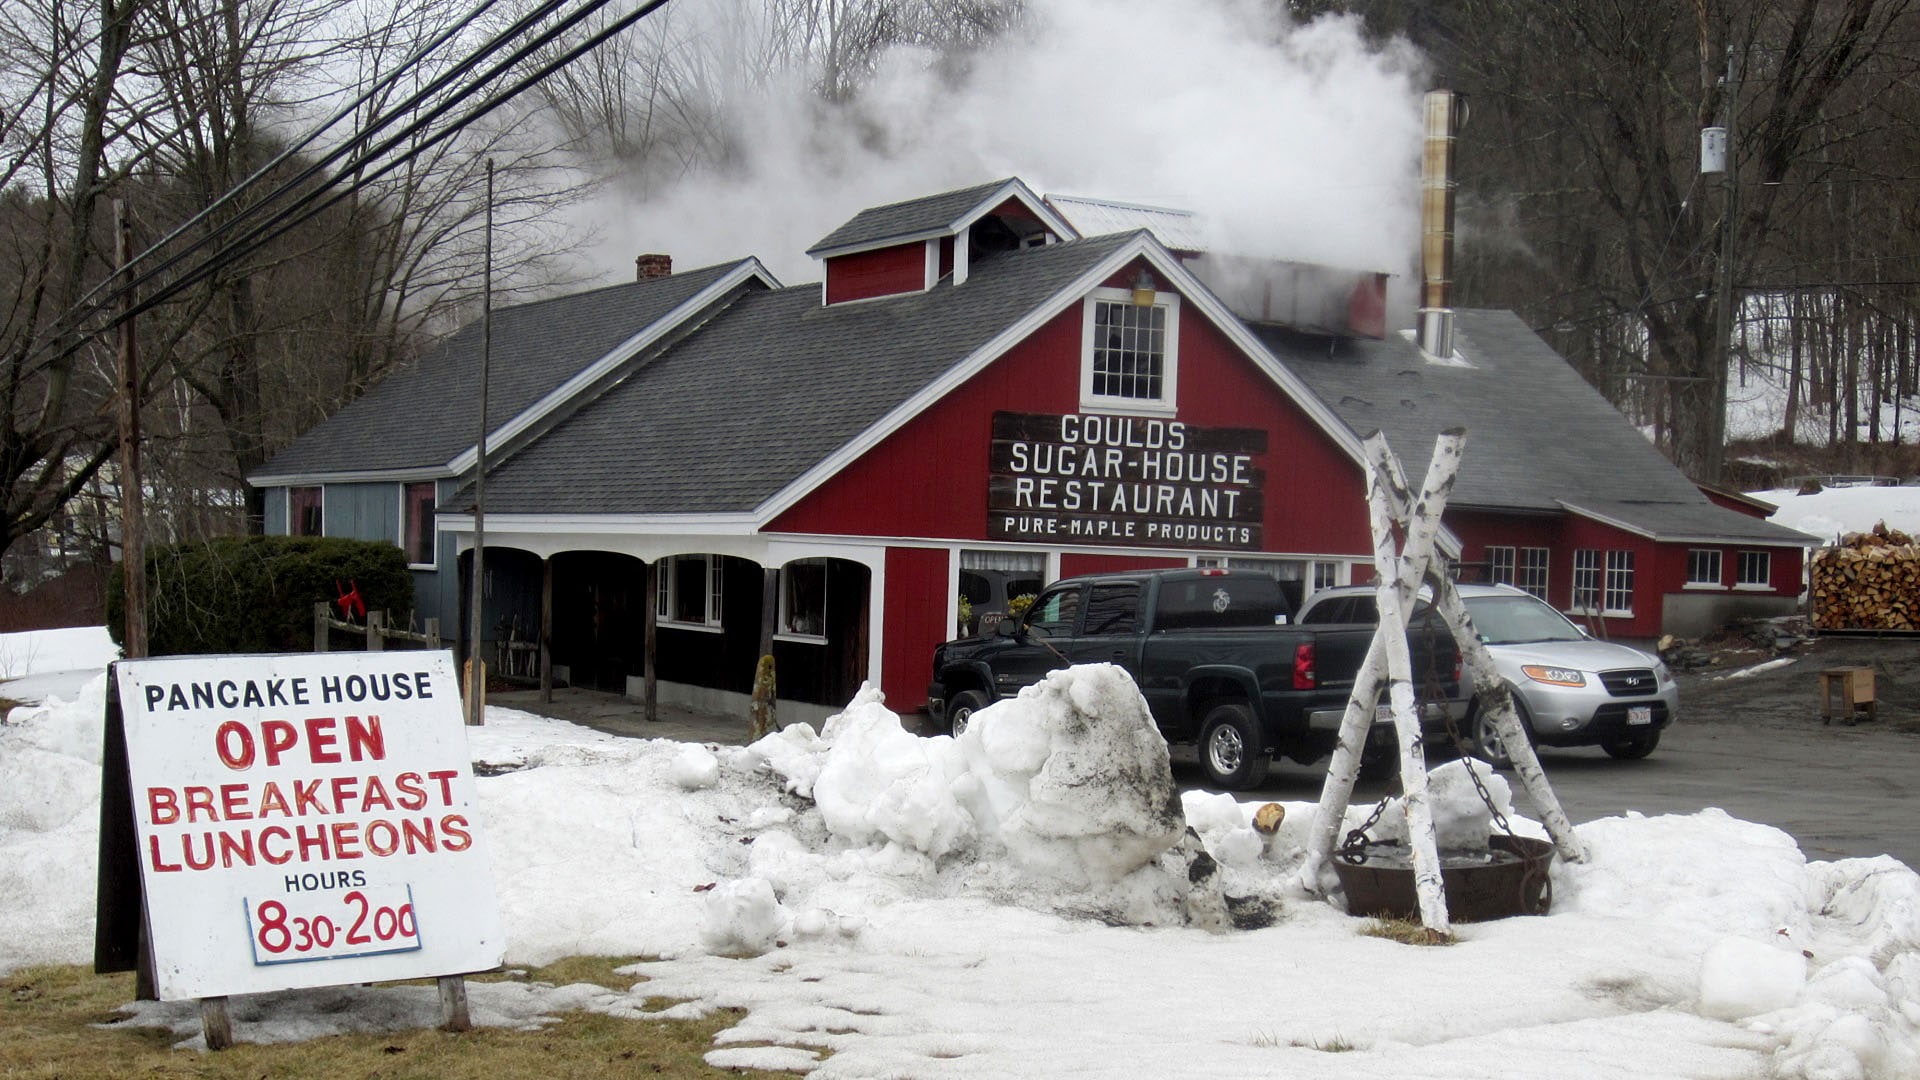 Road Trip to Maple Sugar Shacks in New England